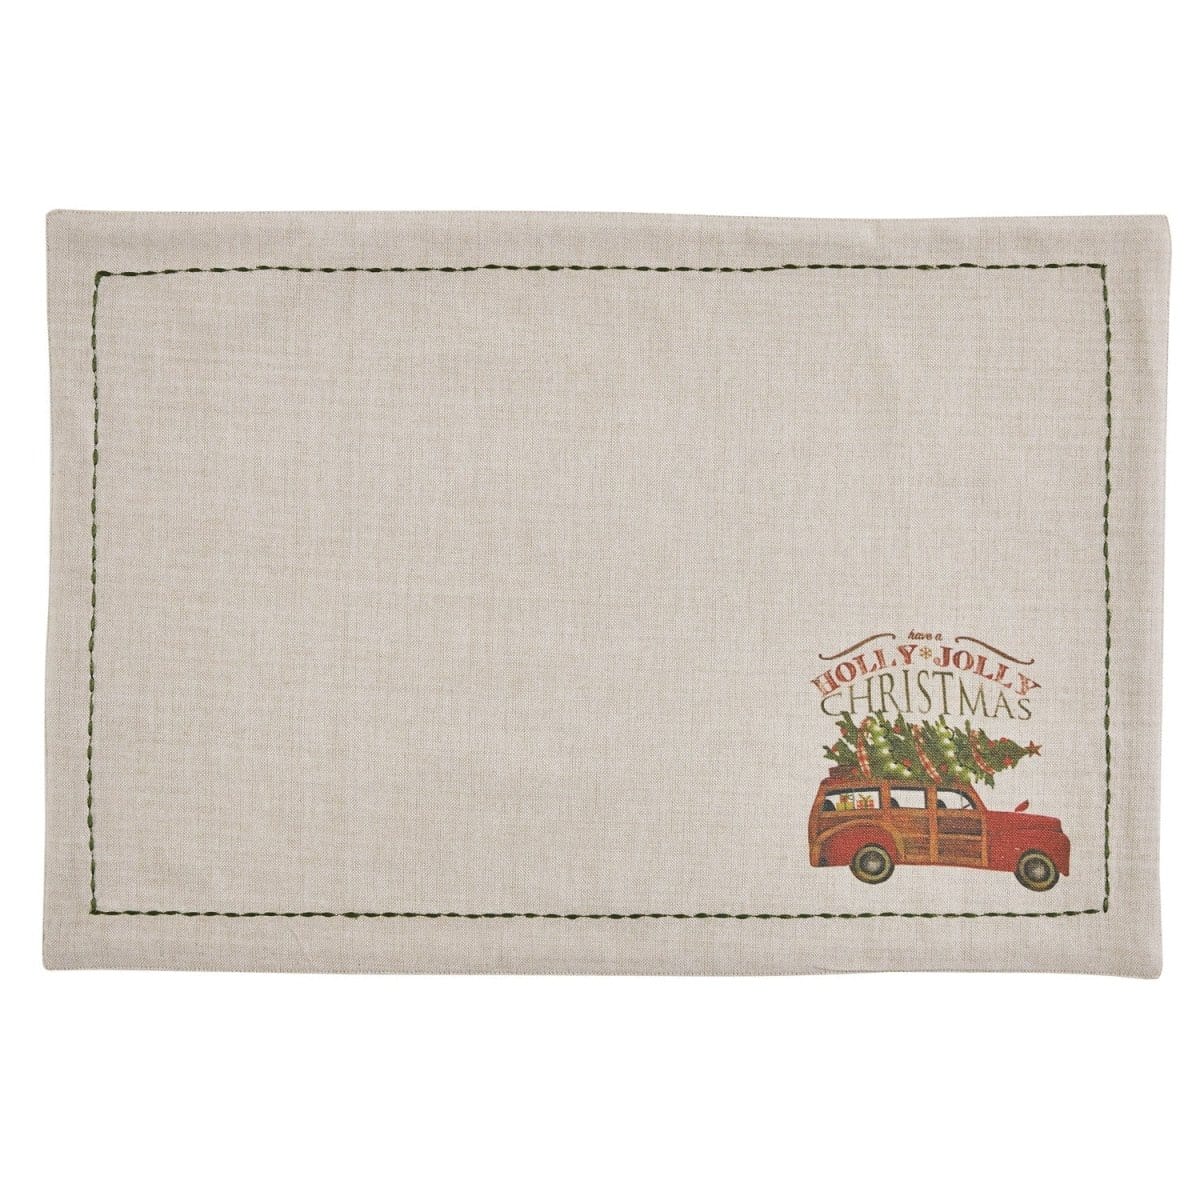 Over the River Printed woody Placemat-Park Designs-The Village Merchant